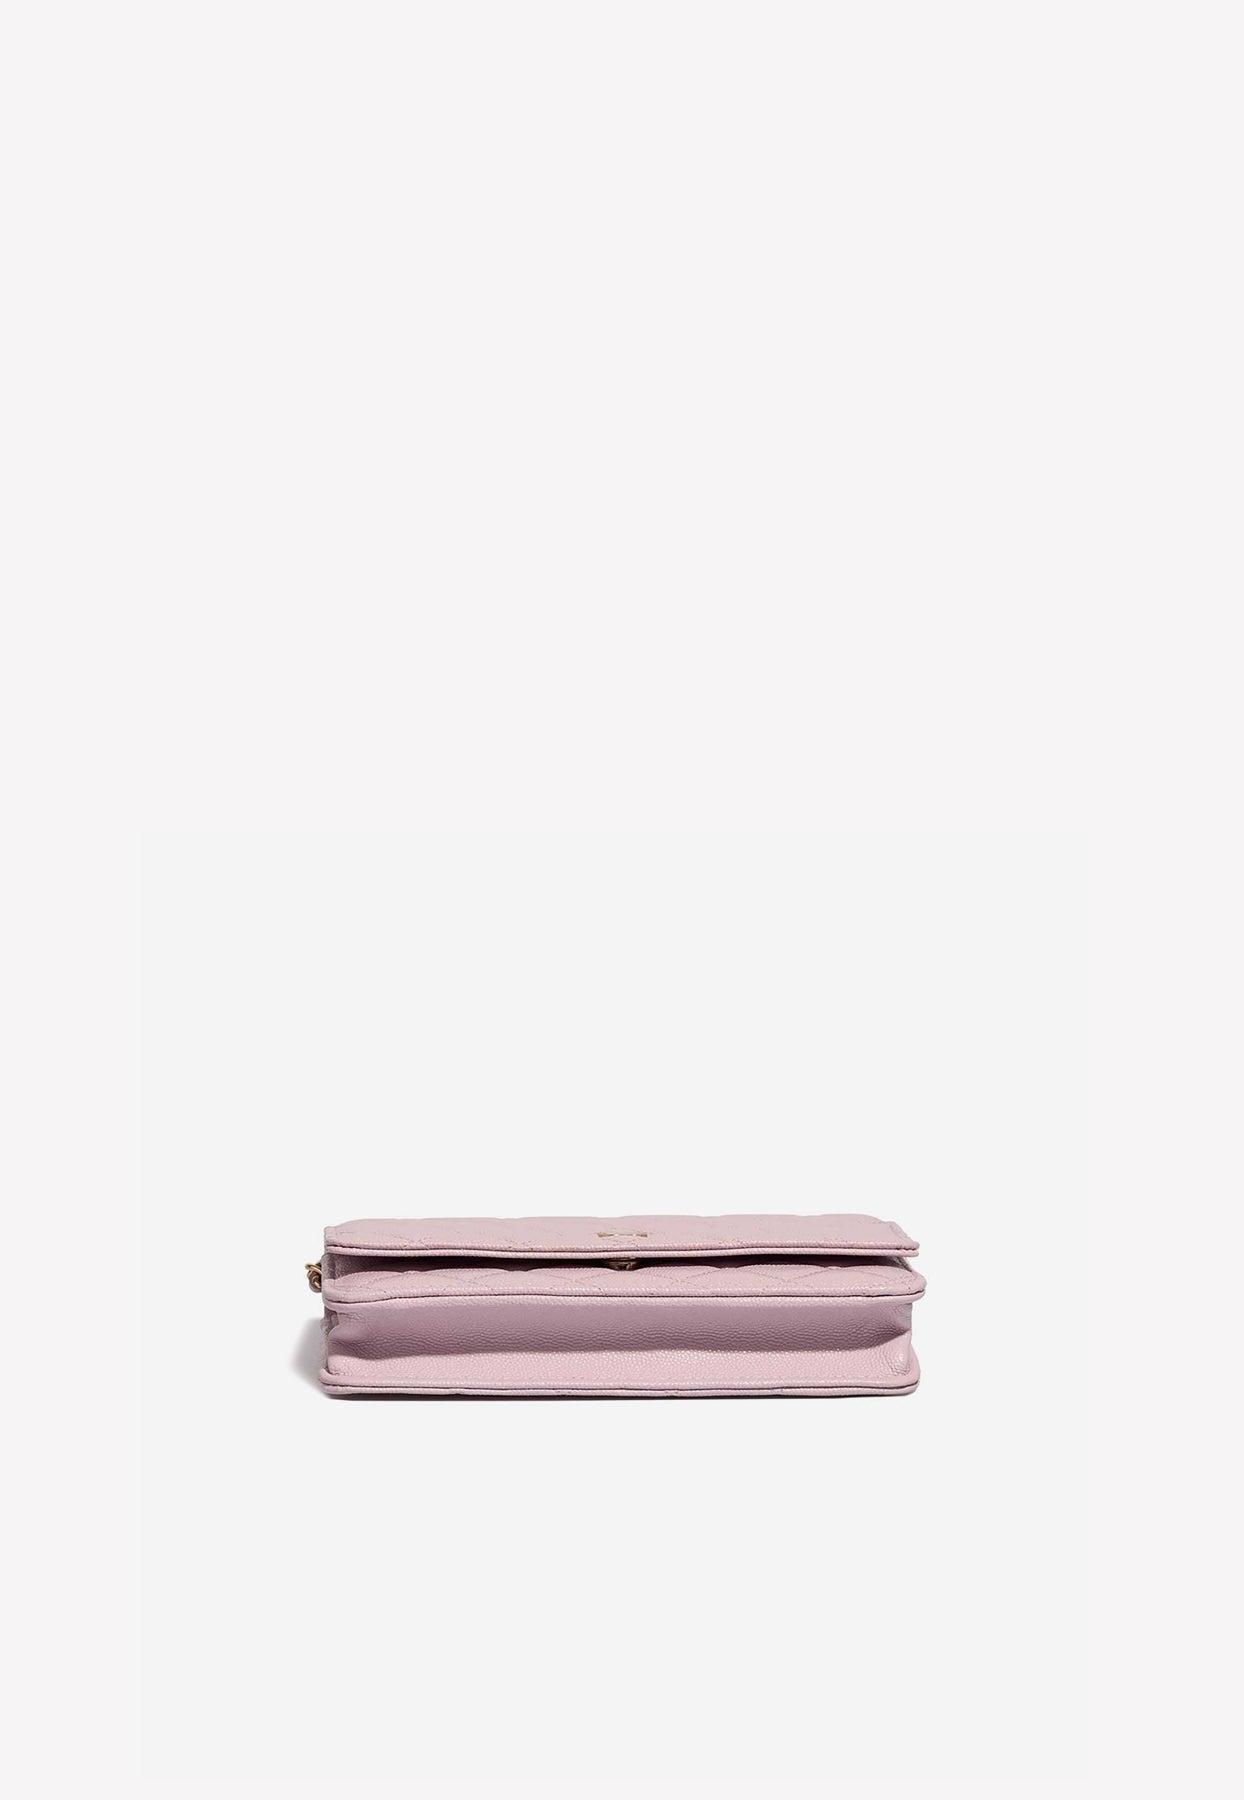 Timeless/classique leather card wallet Chanel Pink in Leather - 35900368